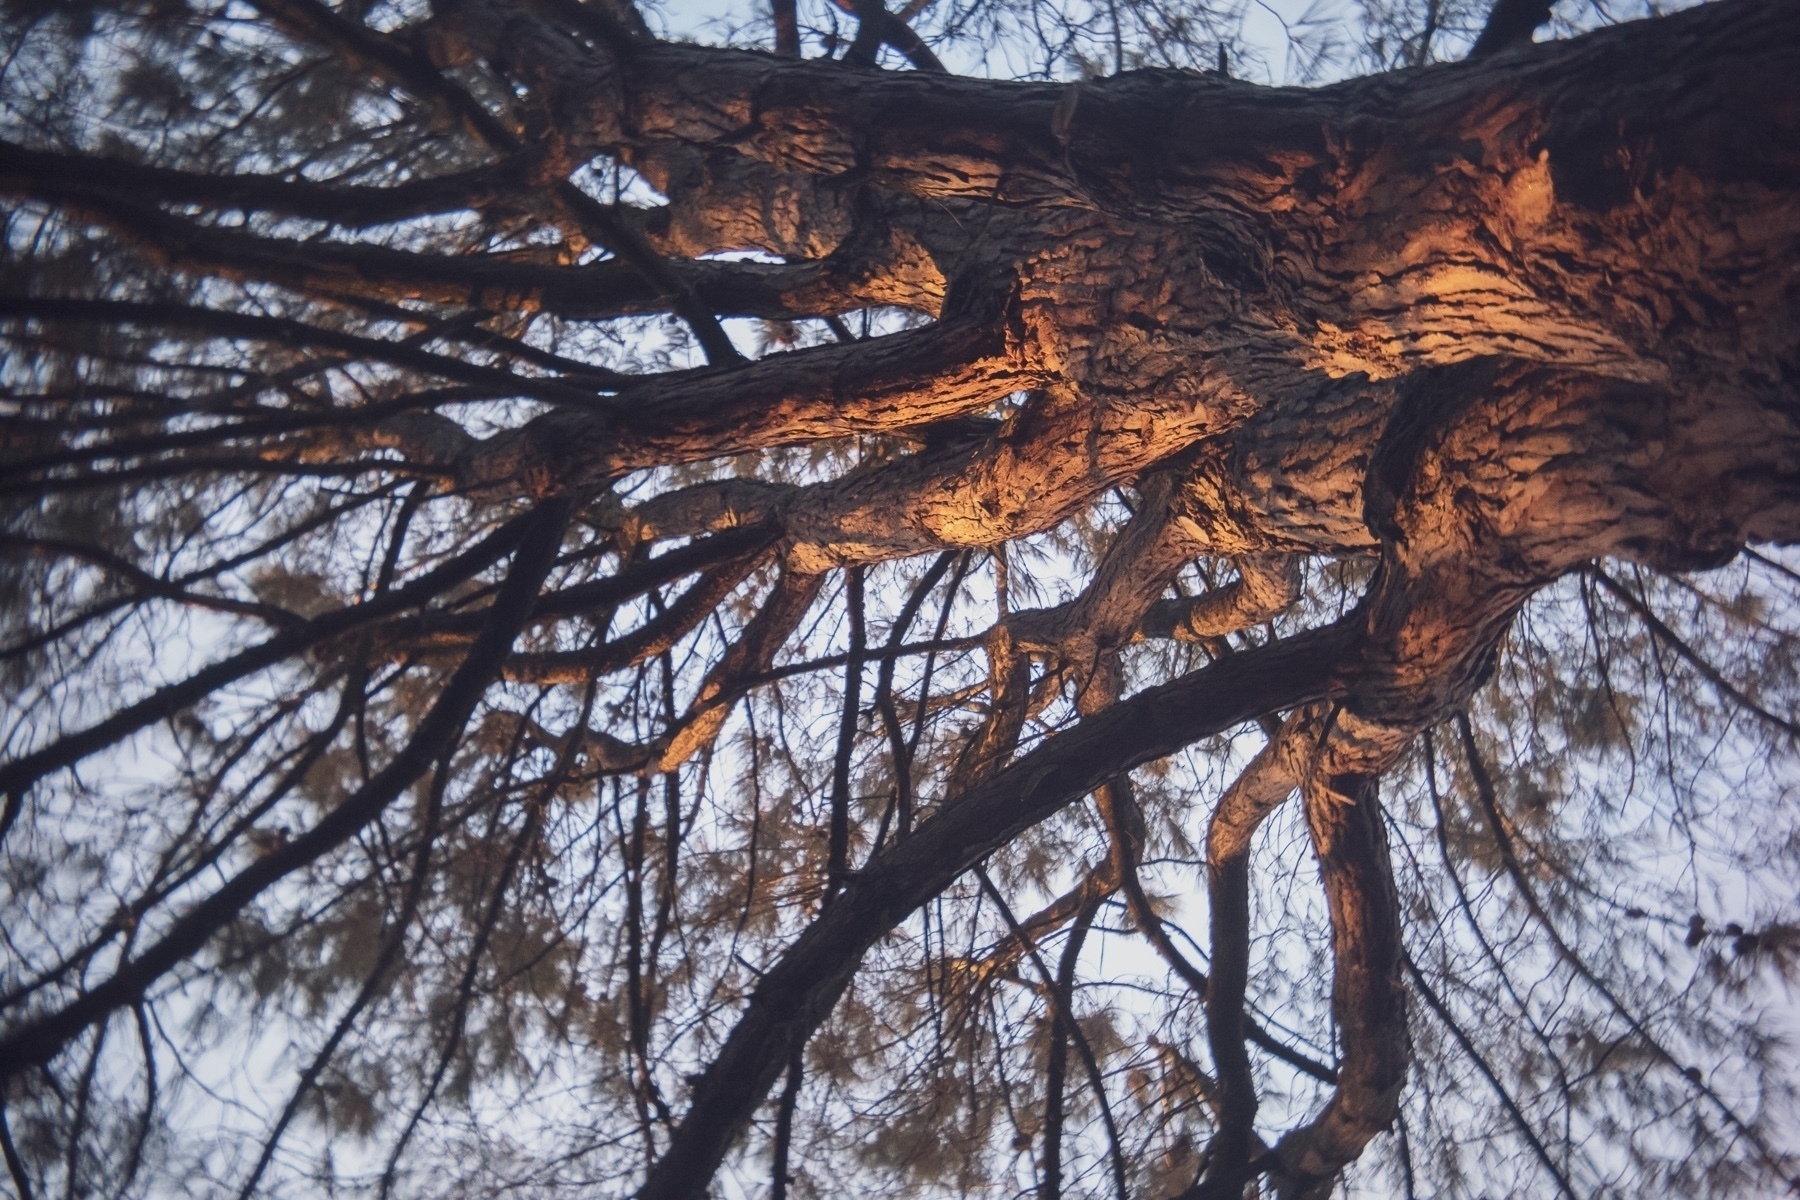 Looking up from under a tree with a giant trunk, and many big branches going skywards all lit by the warm light of sunset